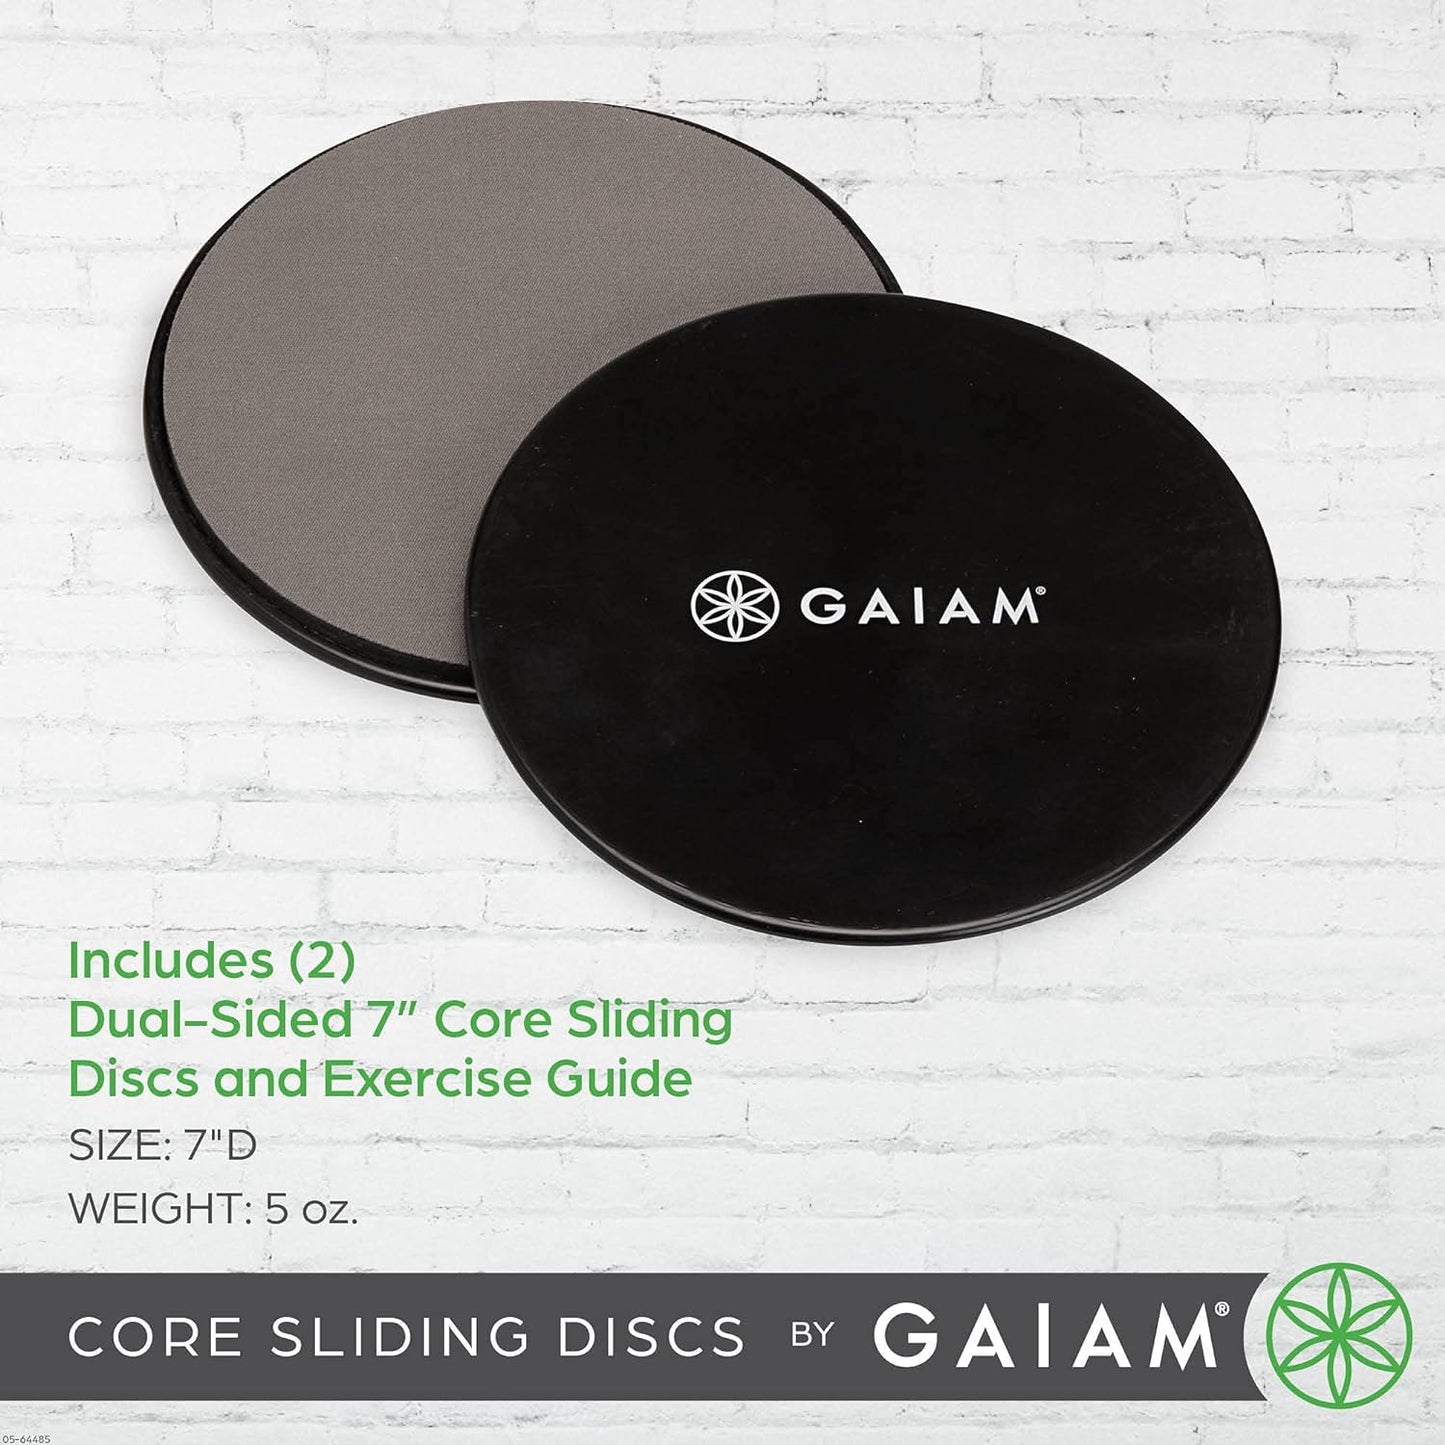 Gaiam Core Sliding Discs - Dual Sided Workout Sliders for Carpet & Hardwood Floor - Home Ab Pads Exercise Equipment Fitness Sliders for Women and Men, Grey/Black